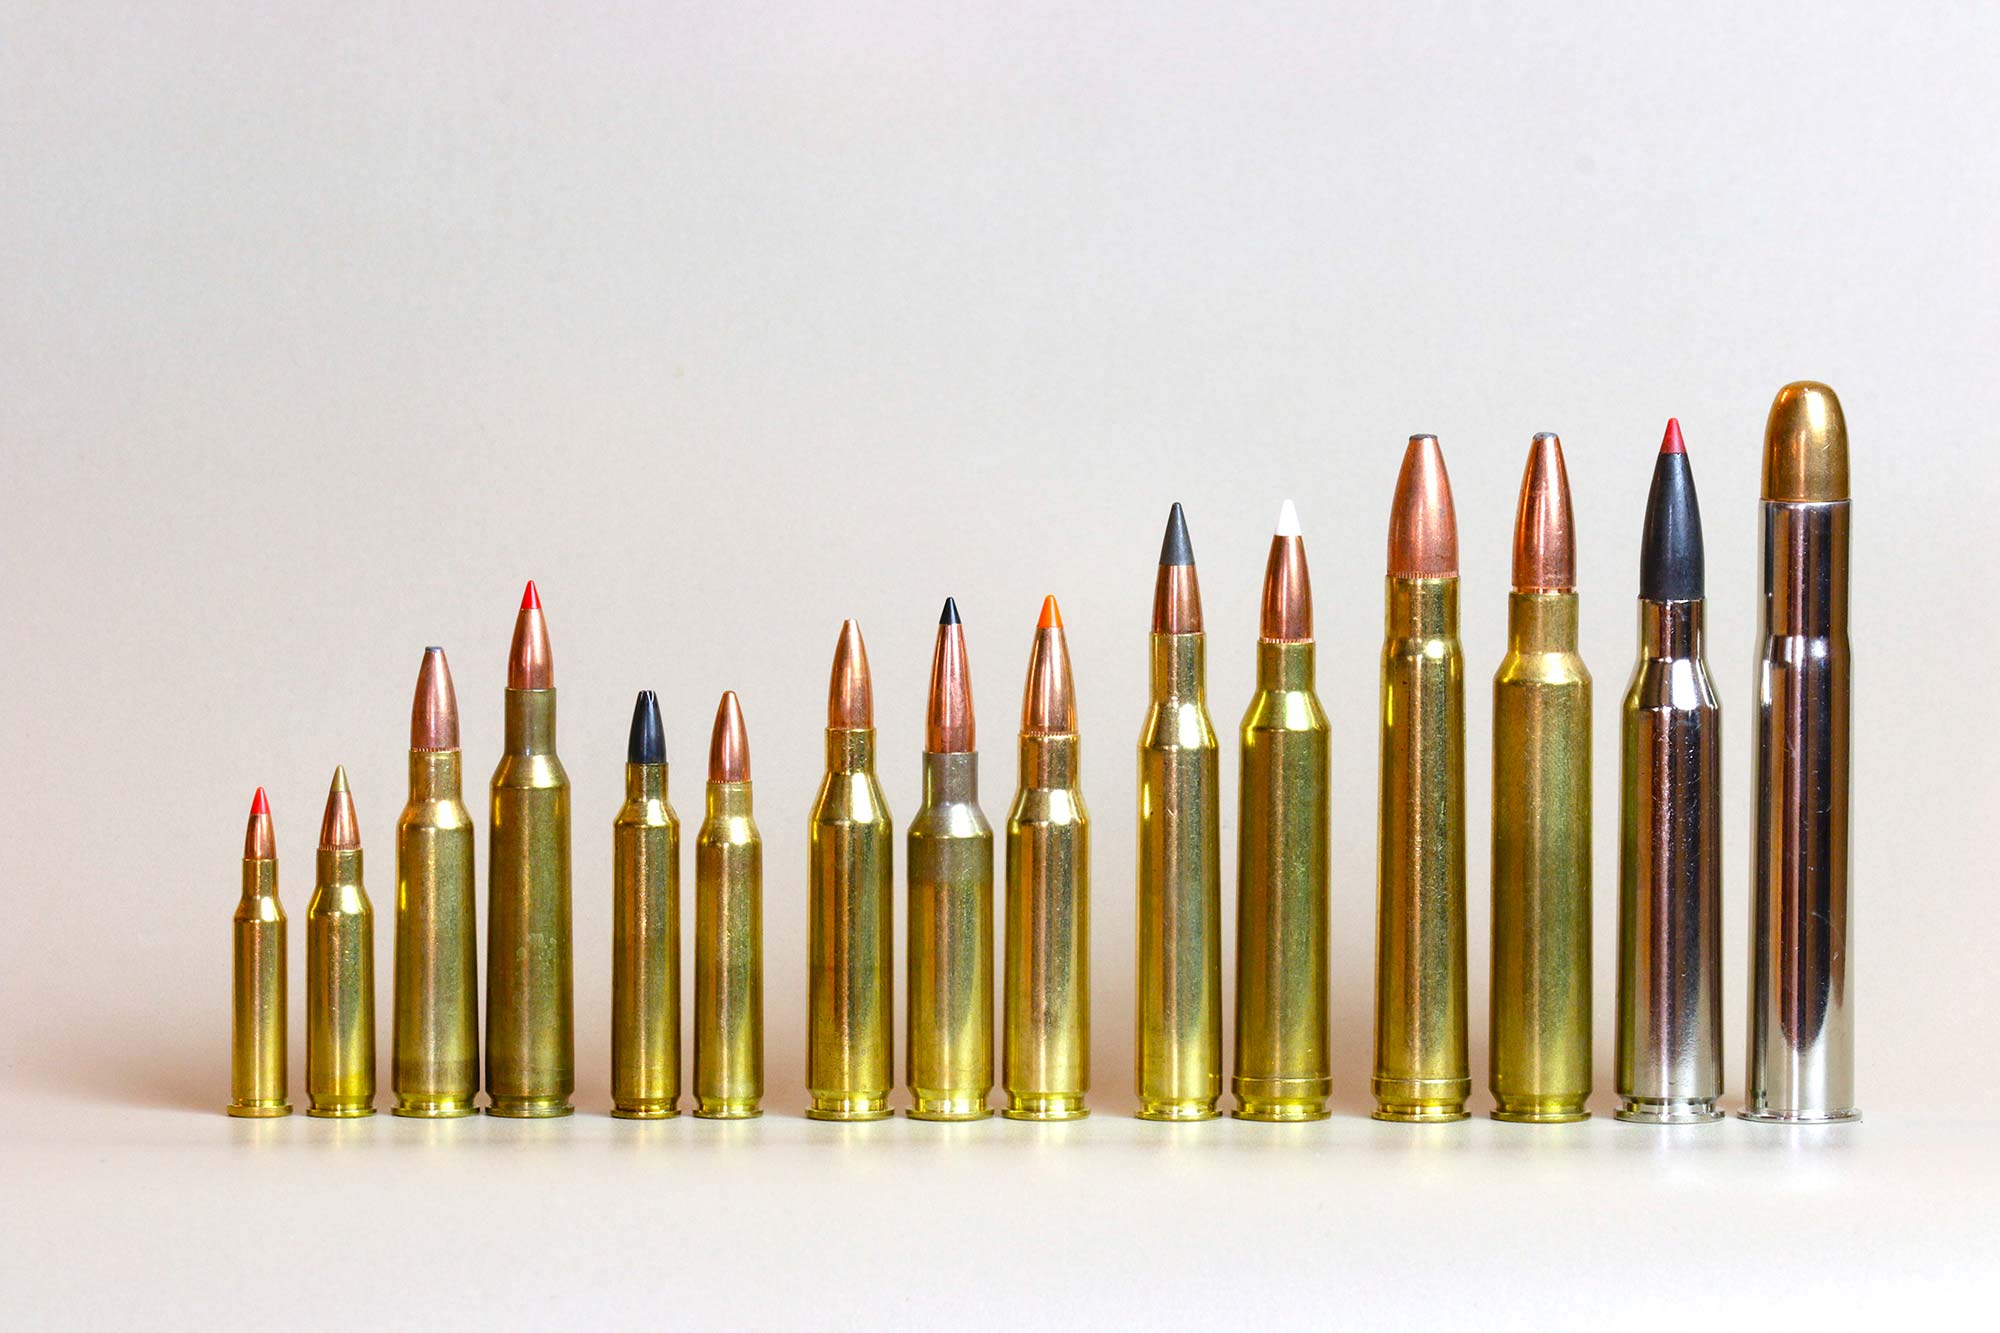 The .17 Hornet on far left is on a whole ‘nother planet from the .470 Nitro Express far right.